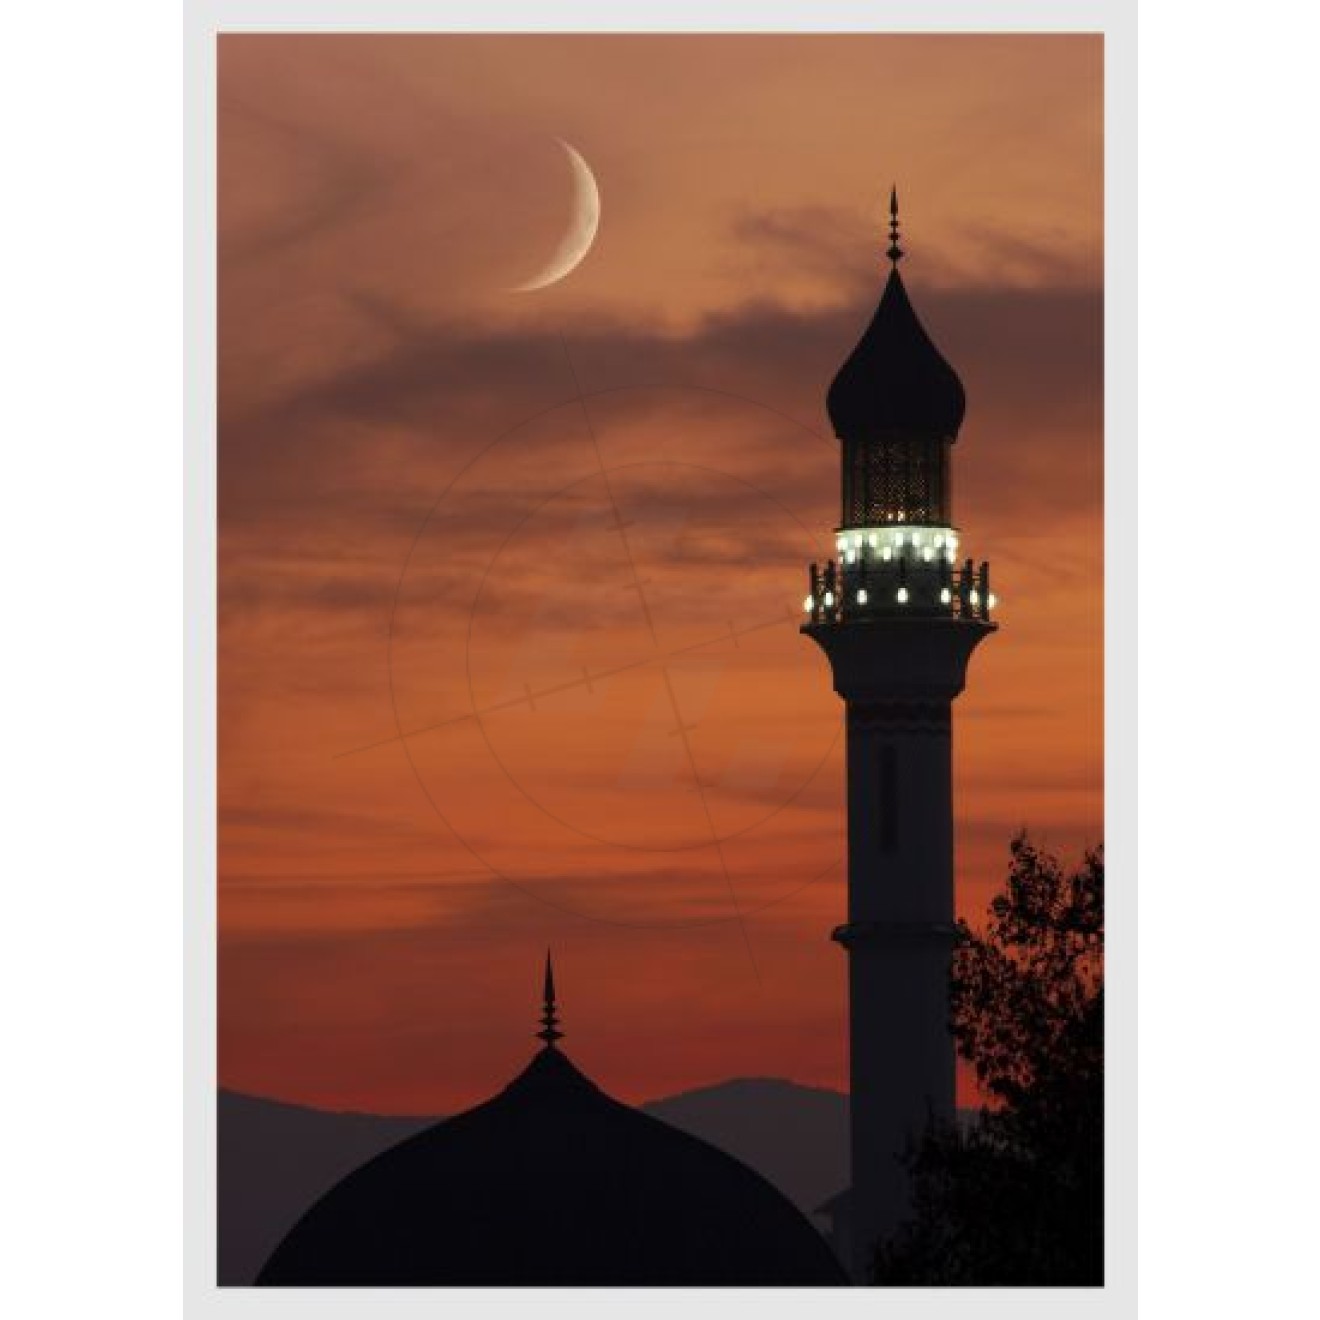 Moonlight over the mosque